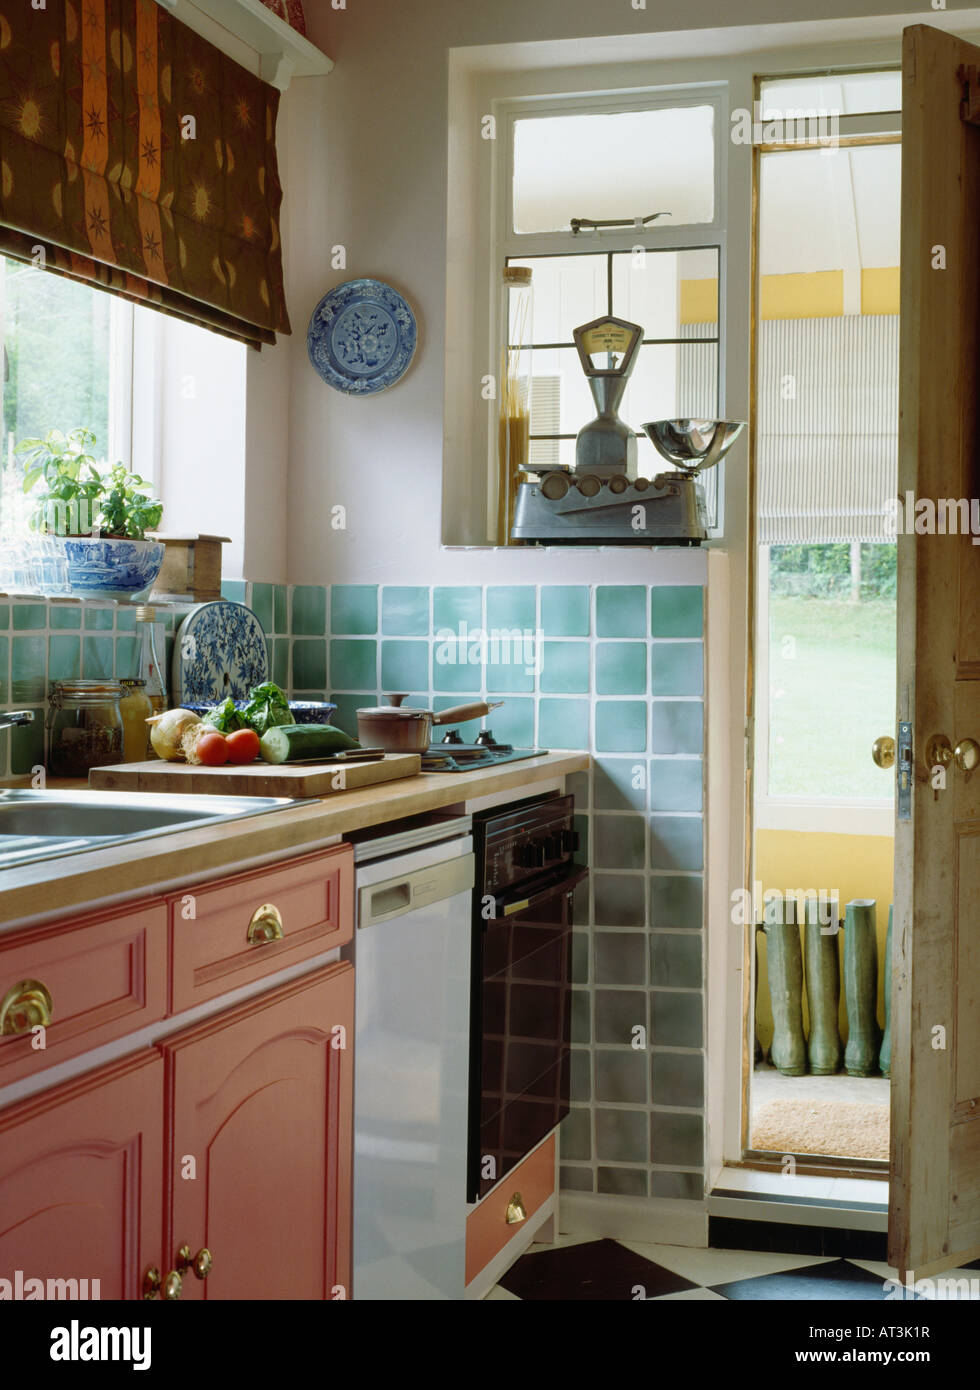 https://c8.alamy.com/comp/AT3K1R/scales-on-windowsill-beside-open-door-in-small-nineties-kitchen-with-AT3K1R.jpg